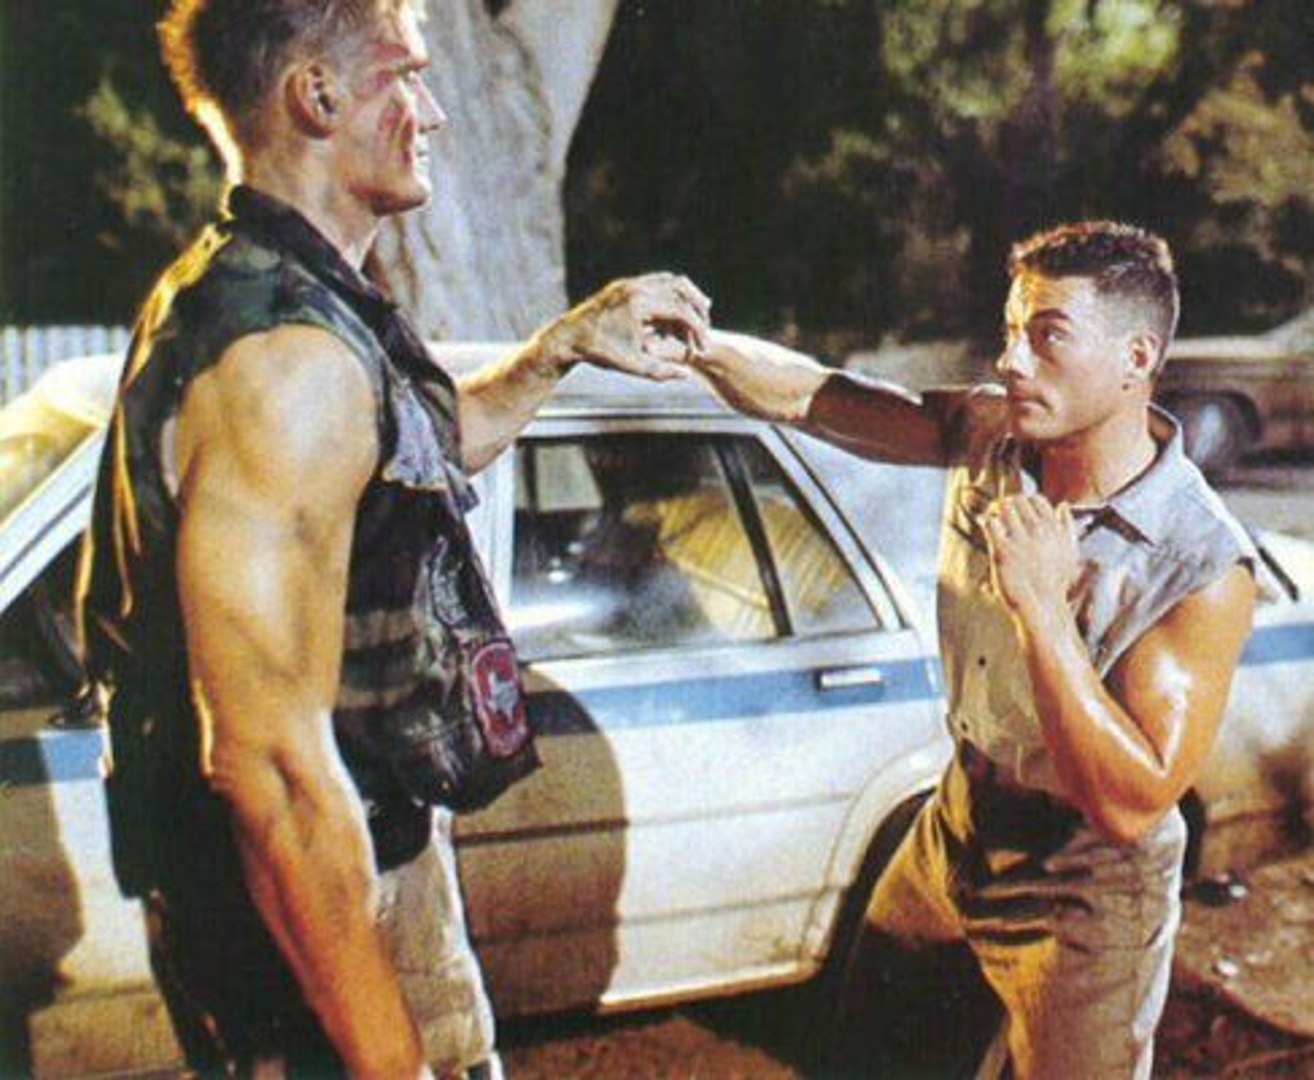 That Time Van Damme Almost Beat up Dolph Lundgren - video Dailymotion